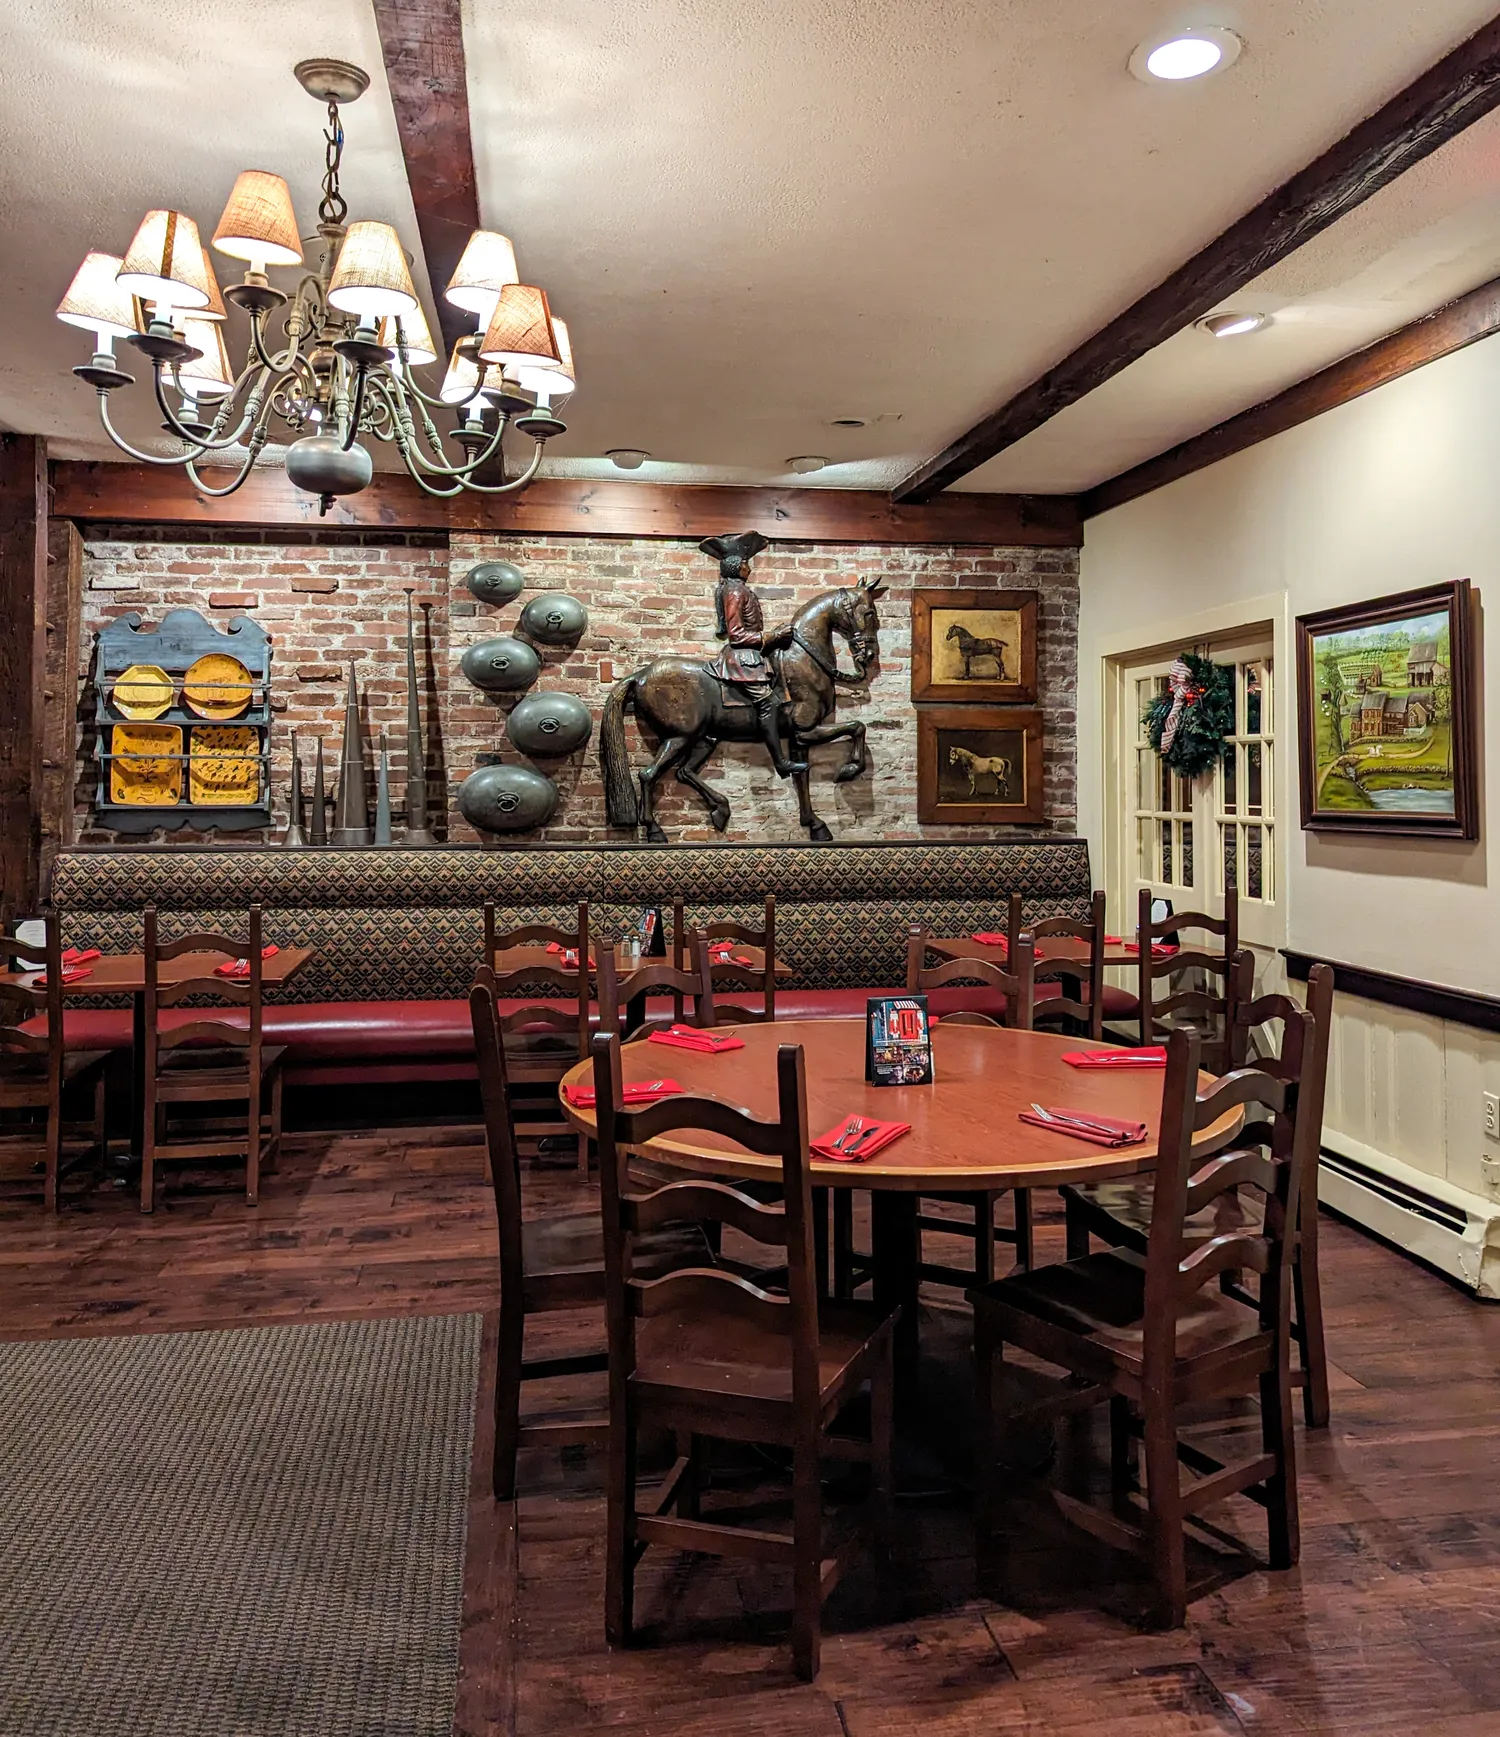 The newly renovated dining room at Cock 'N Bull Restaurant. Booths and a table with decor on the walls. 